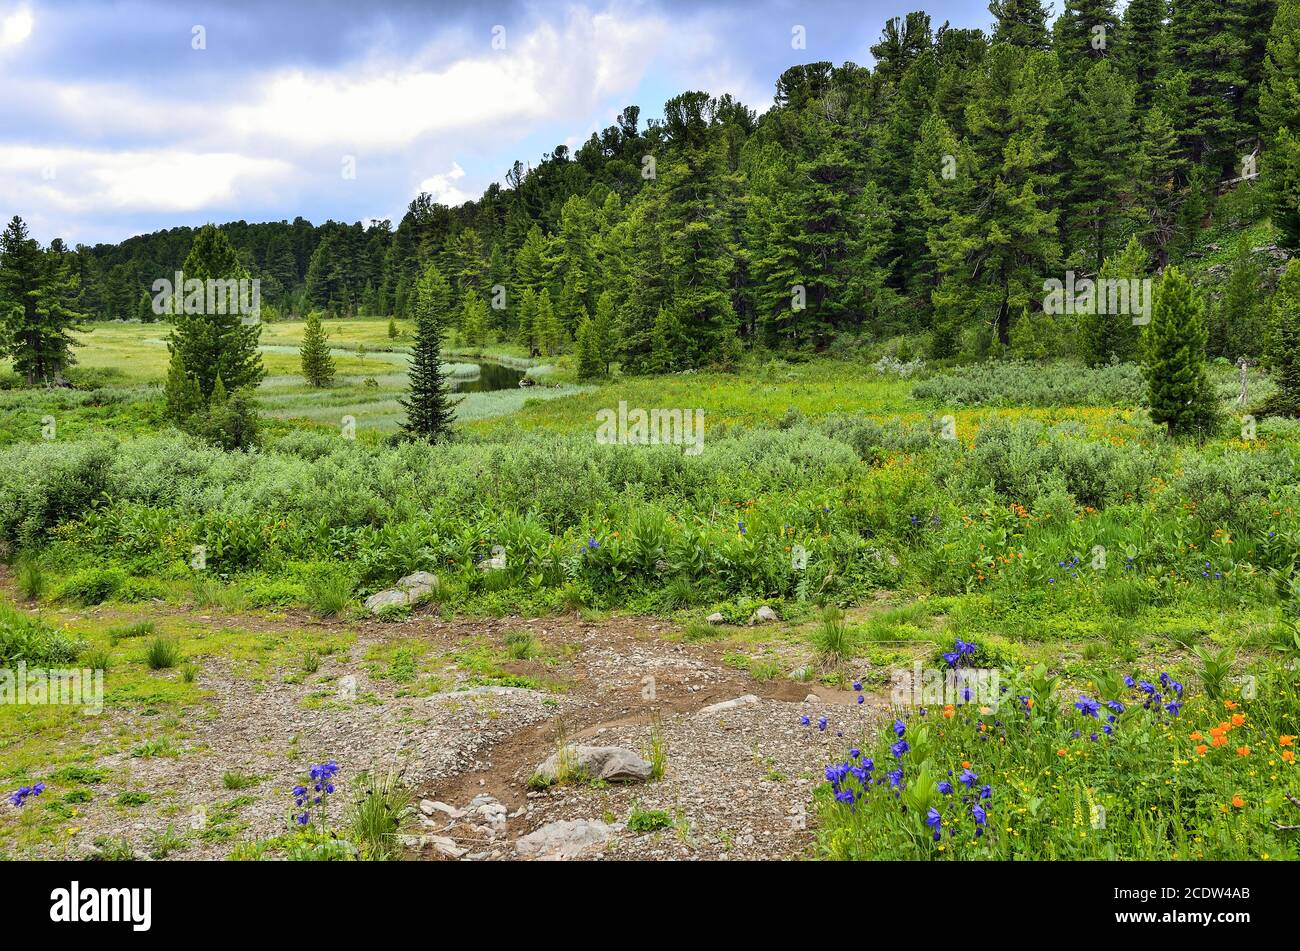 Summer landscape in Altai mountains with creek, alpine meadow and coniferous forest Stock Photo